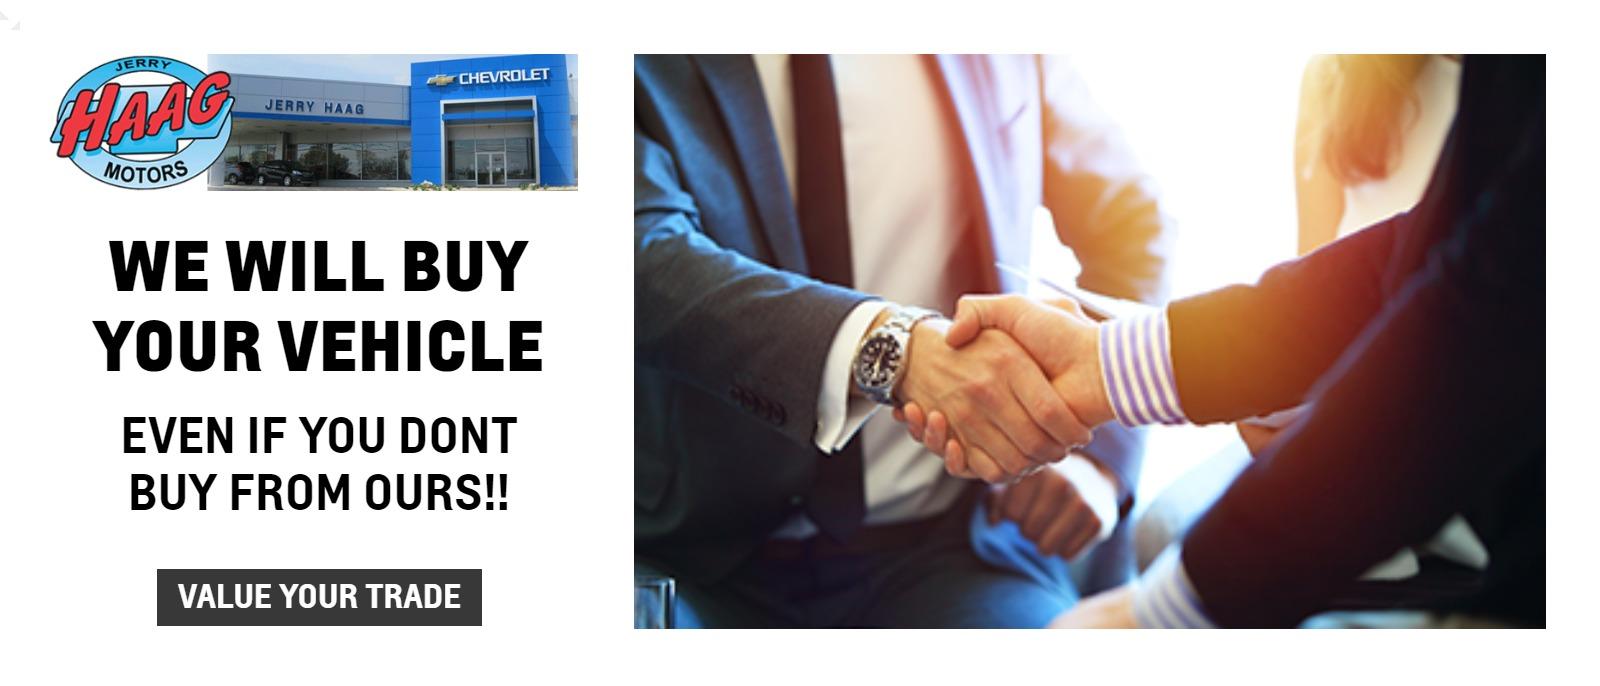 Value Your Trade at Jerry Haag Motors